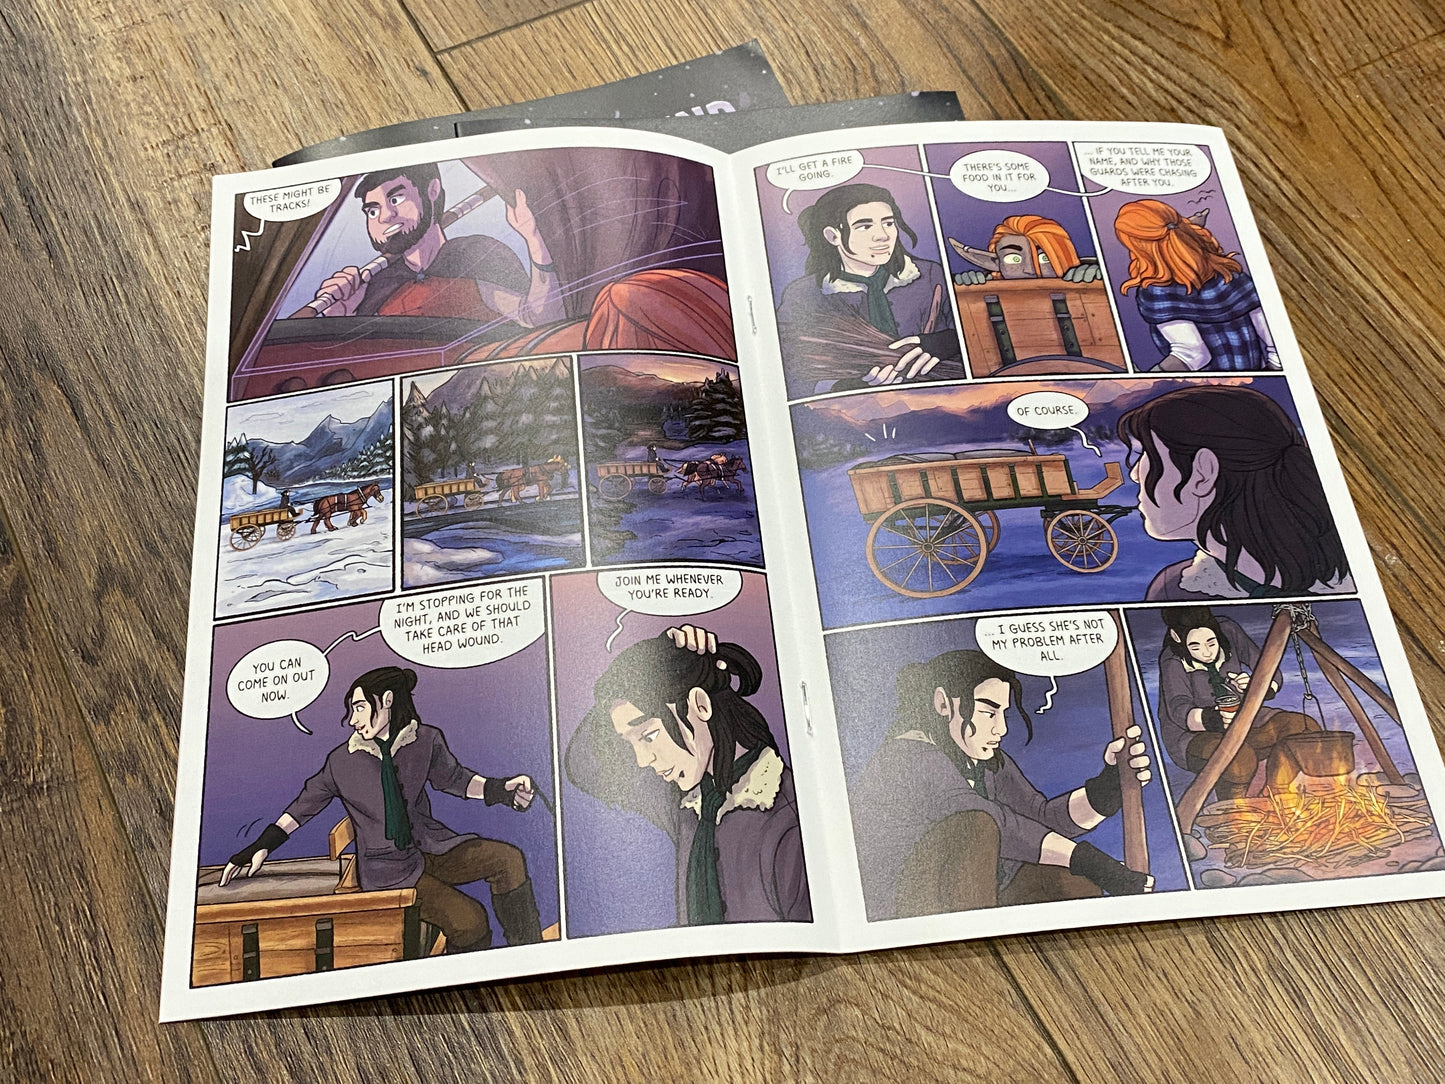 Third page: An open page view of a spread of comic panels of the printed version.